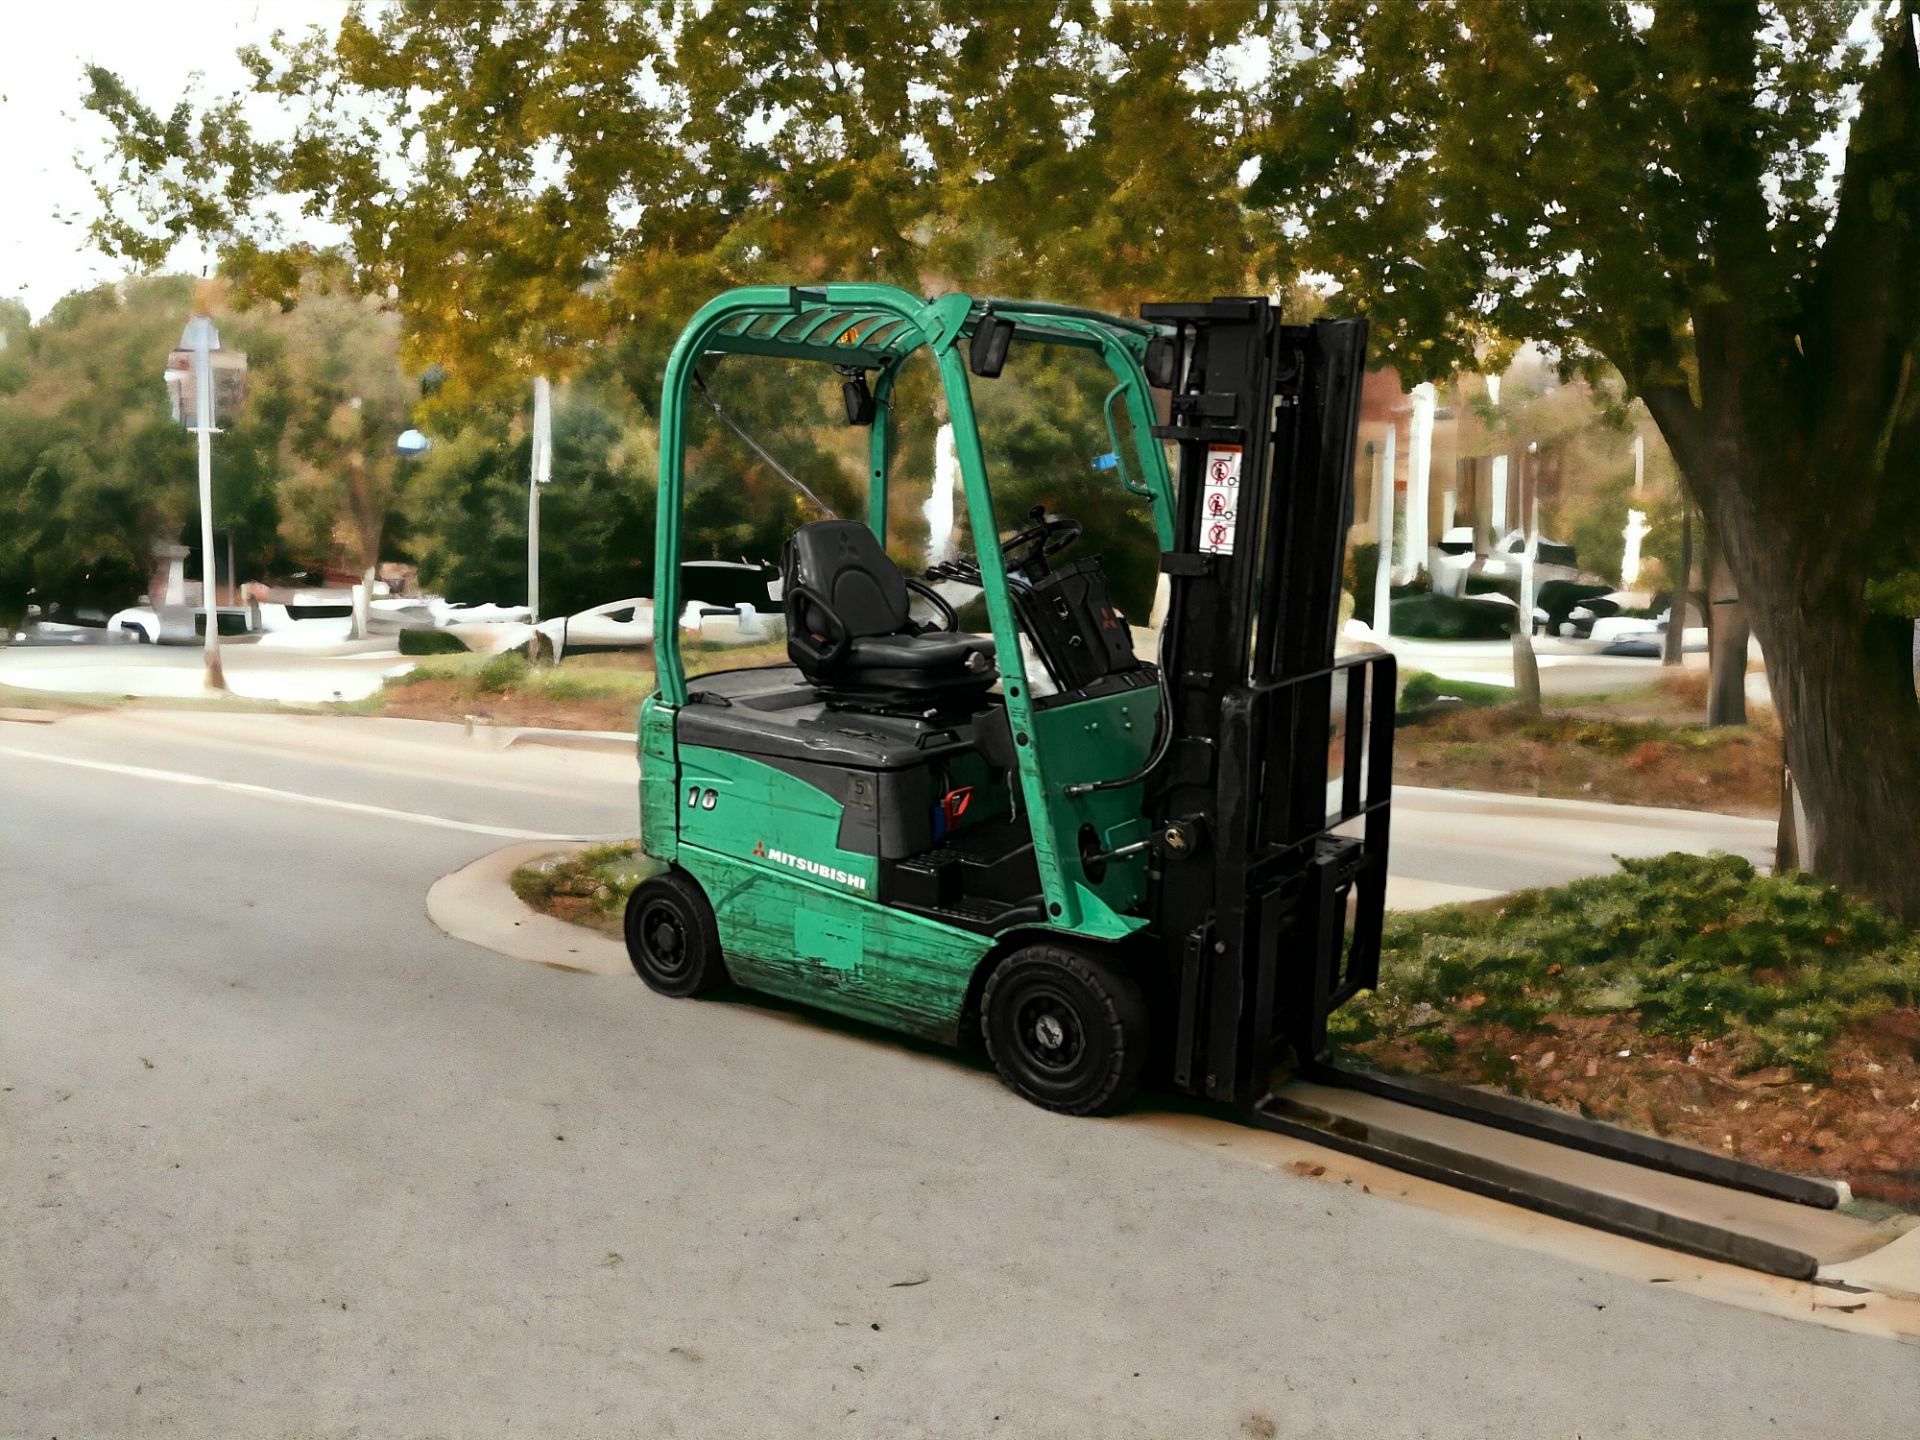 MITSUBISHI ELECTRIC 4-WHEEL FORKLIFT - MODEL FB16N (2005) **(INCLUDES CHARGER)** - Image 5 of 6